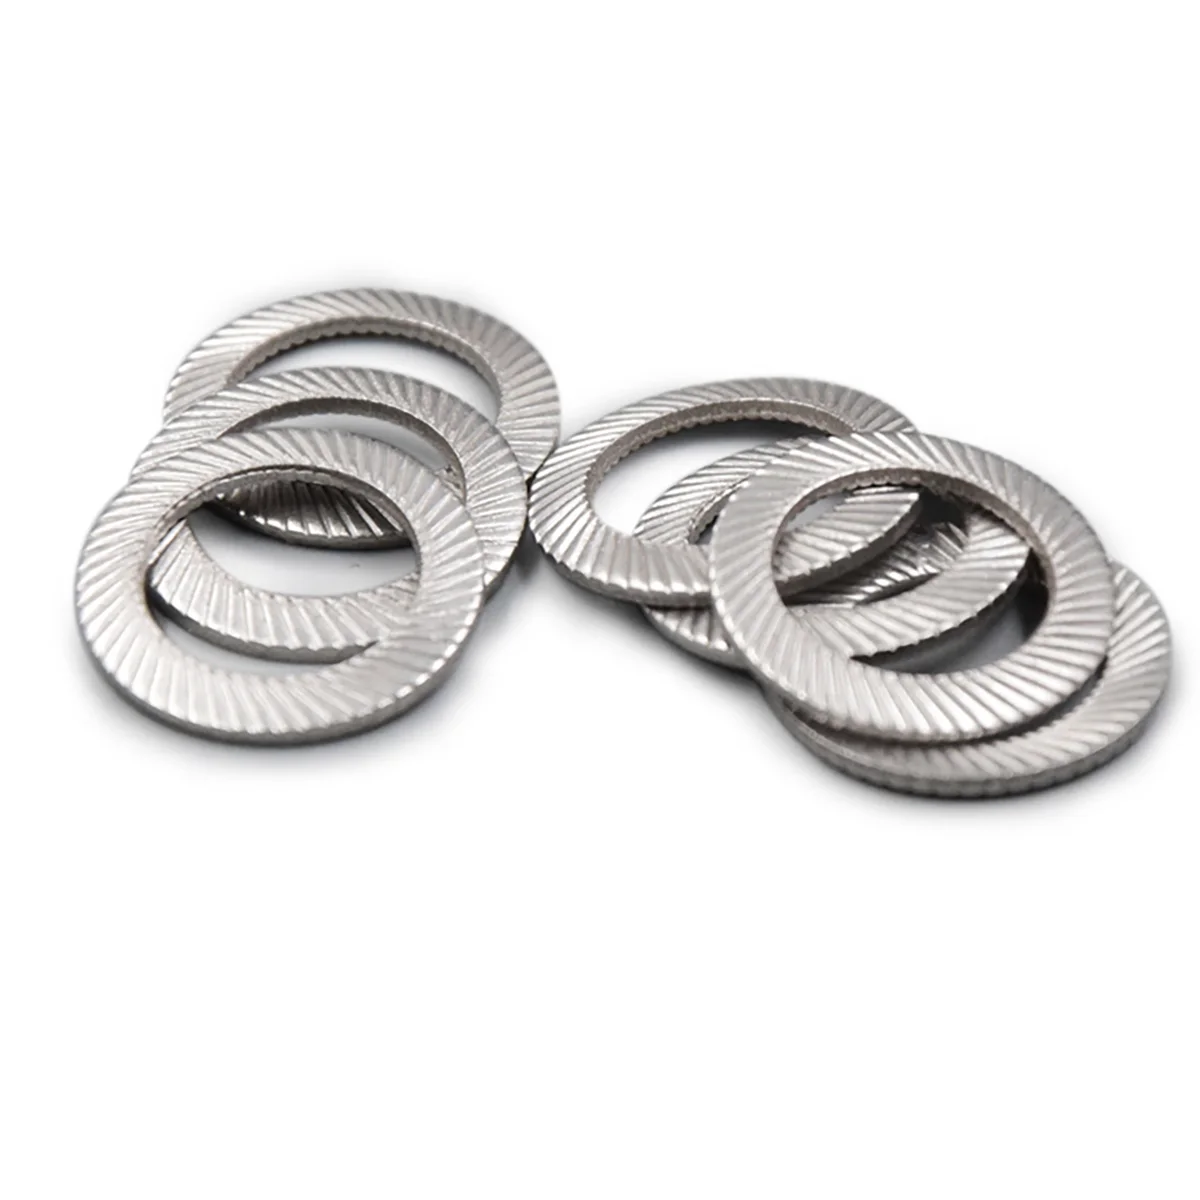 

65 Manganese Steel / 304 Stainless Steel Locking Anti Slip Double-Sided Diagonal Toothed Washer M3M4M5M6M8M10-M30